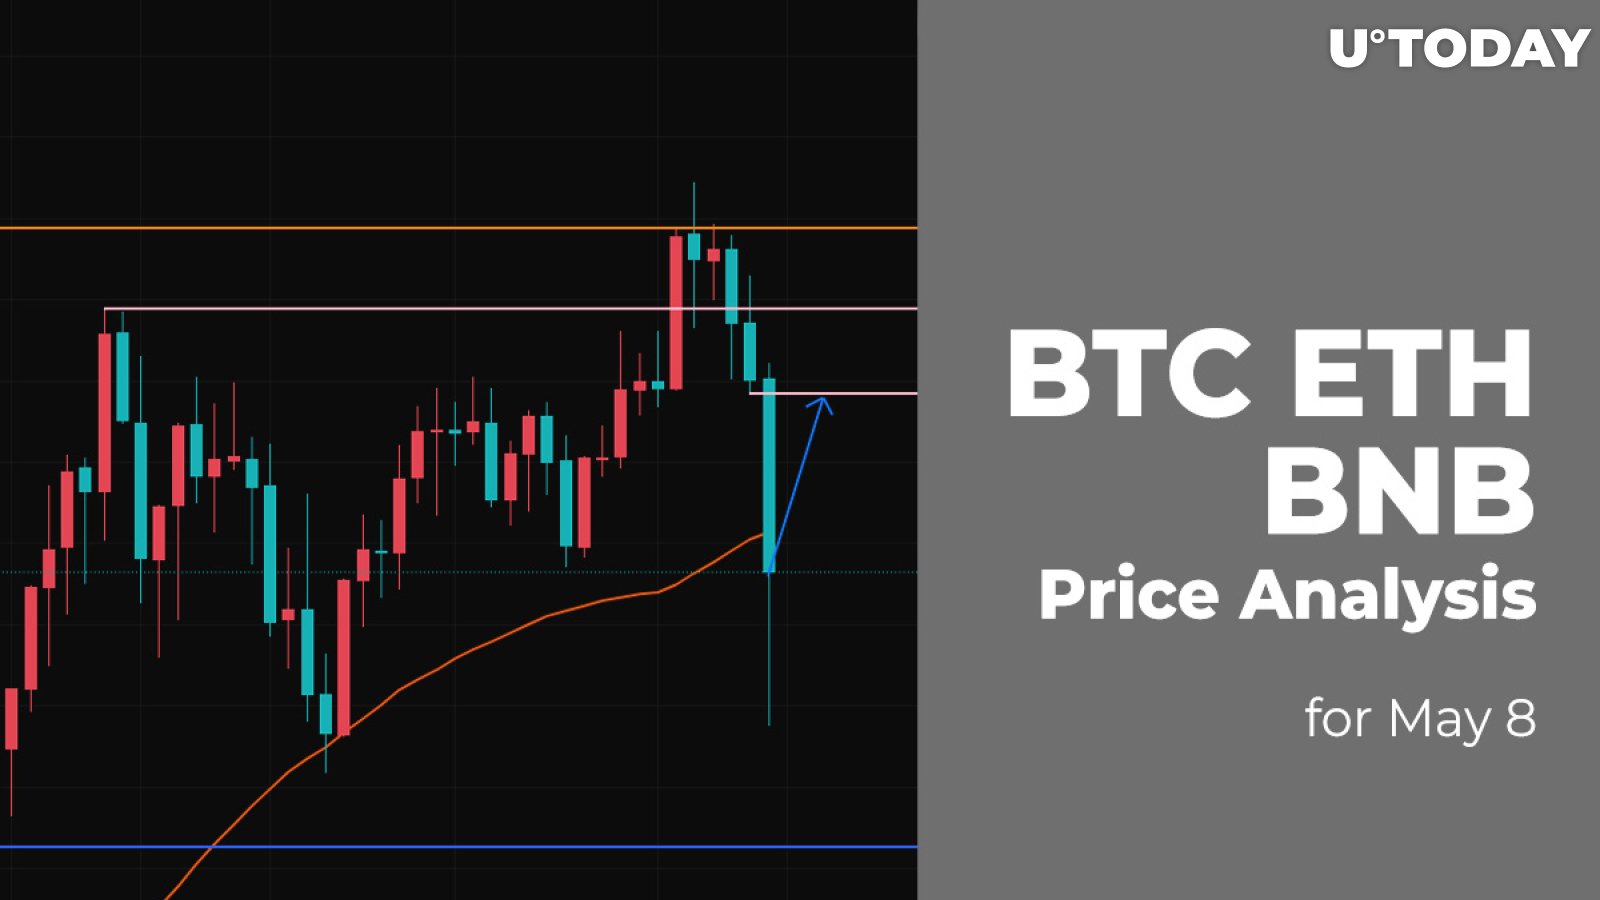 BTC, ETH and BNB Price Analysis for May 8